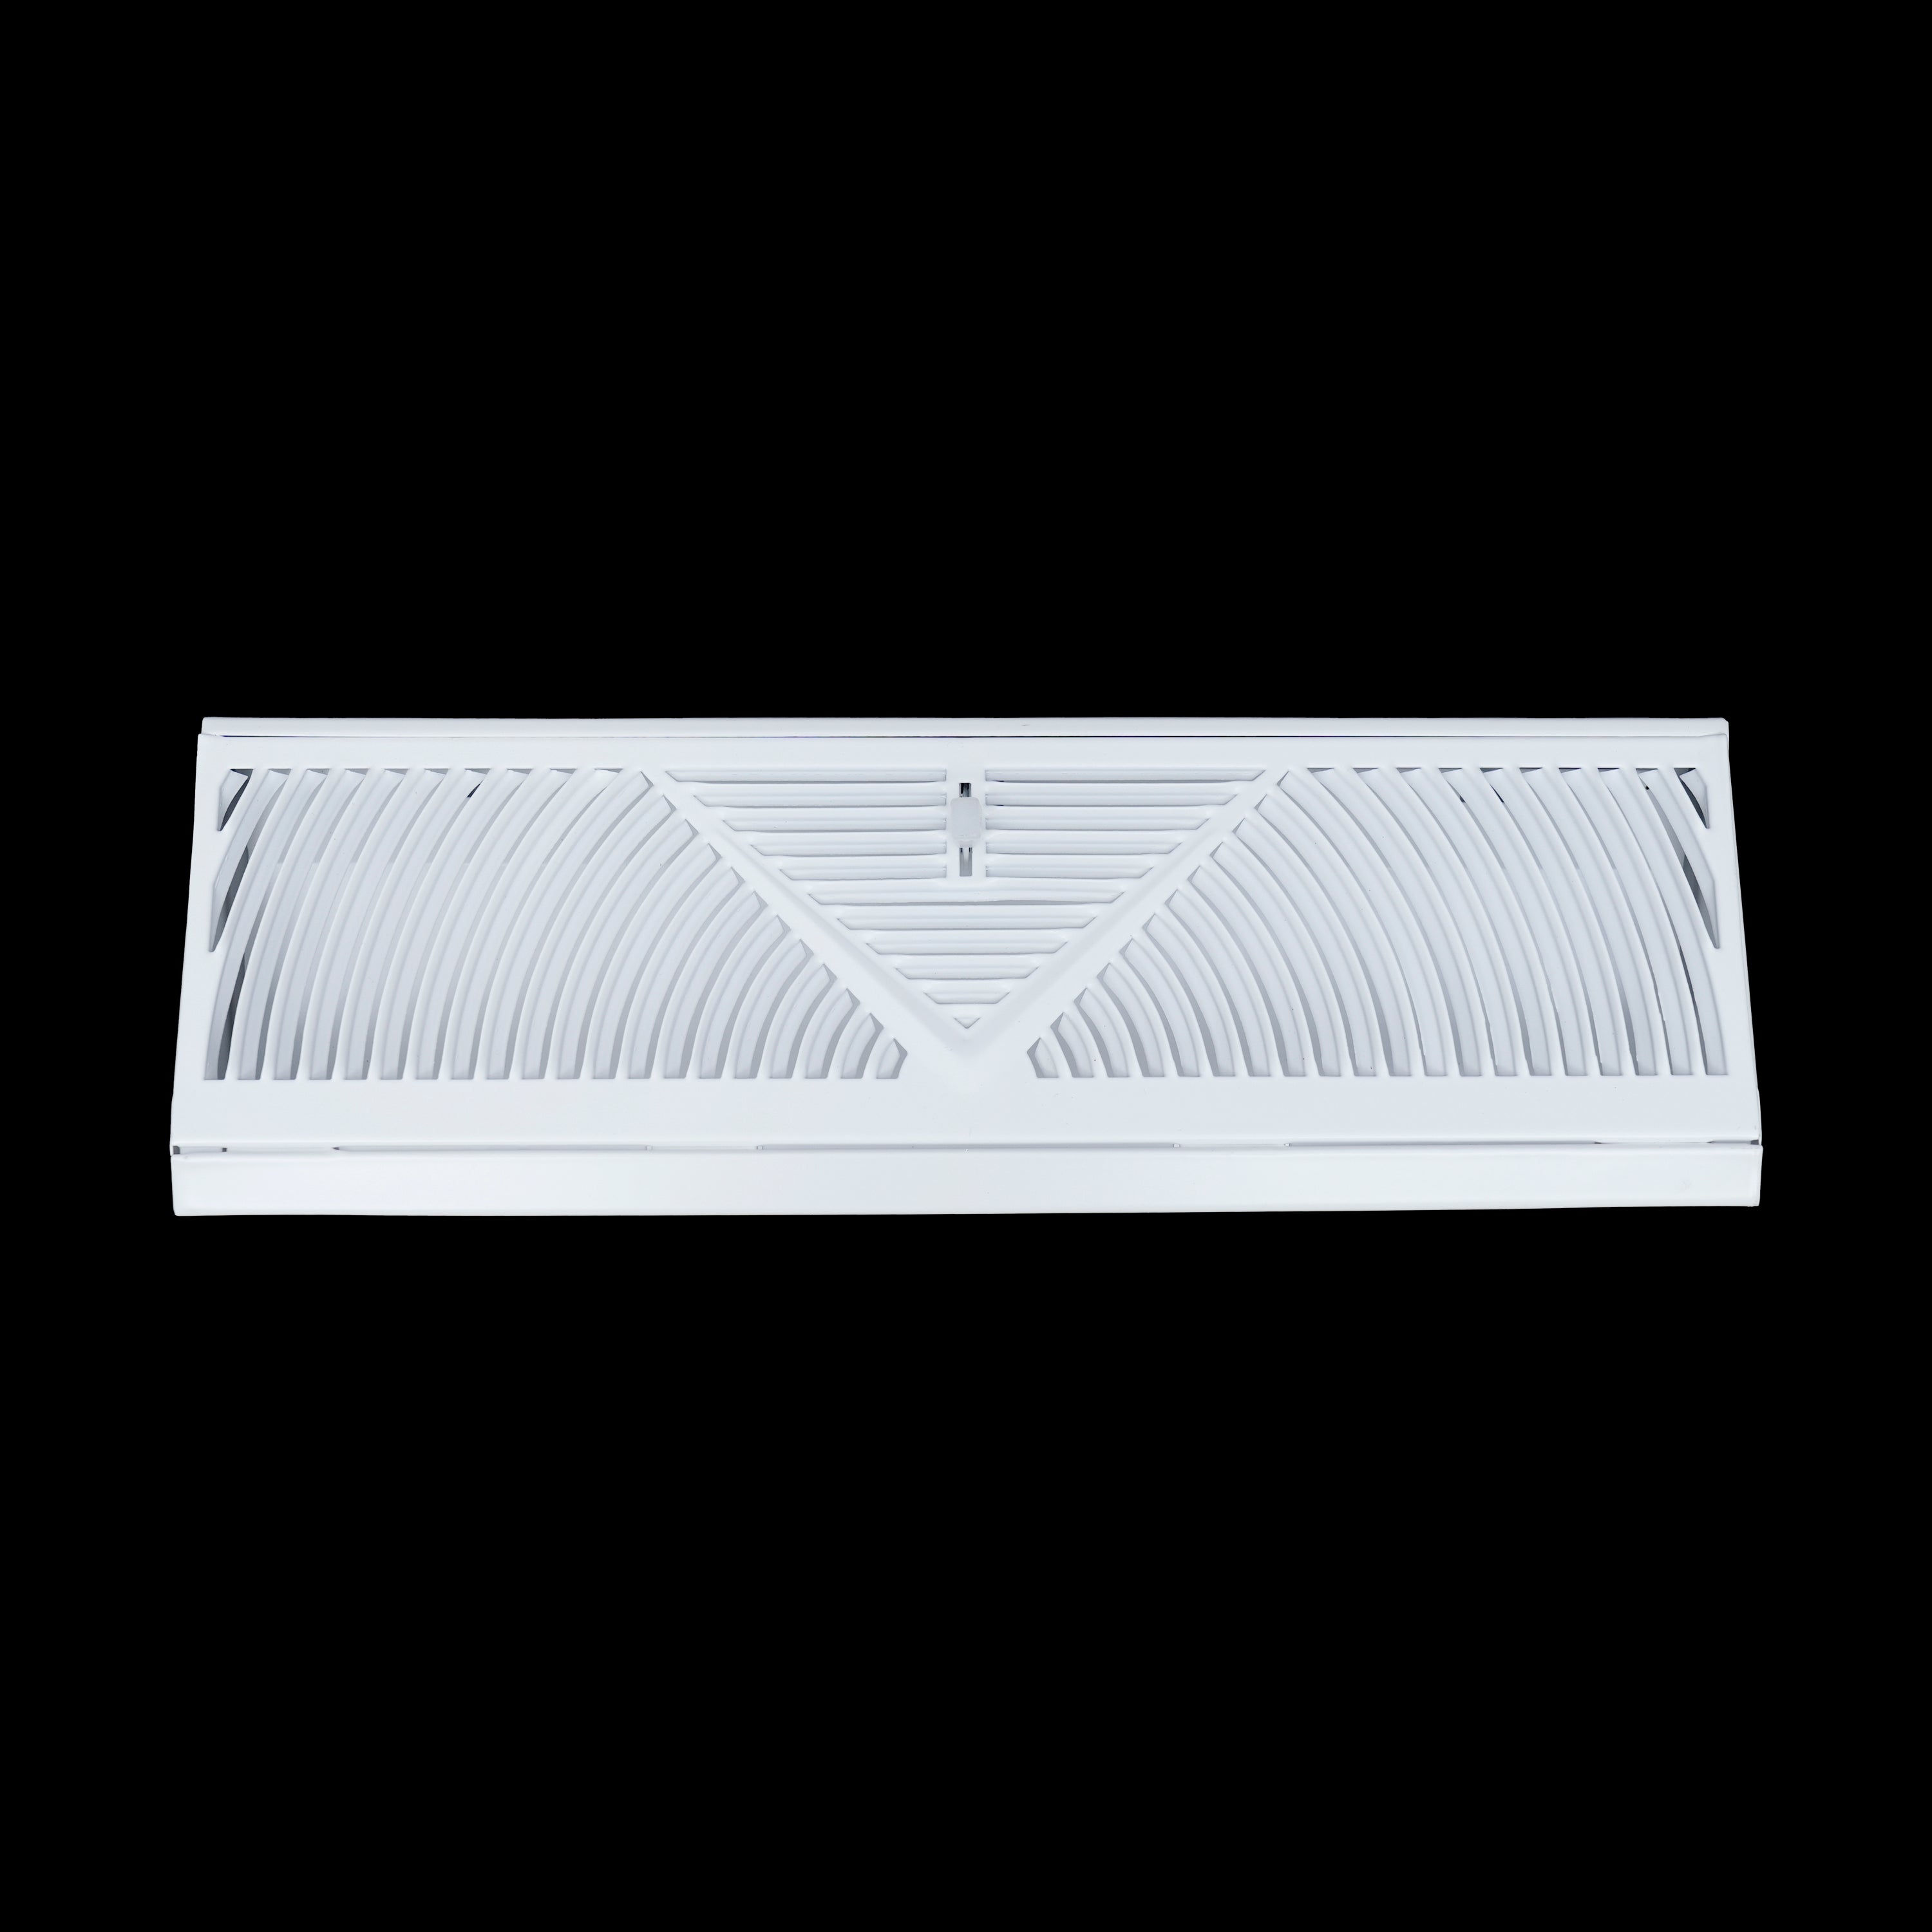 15" Corner Baseboard Return Air Grille | Round Type Air Flow Design | Register Vent Cover Grill | Adjustable Lever for Air Flow Control | White